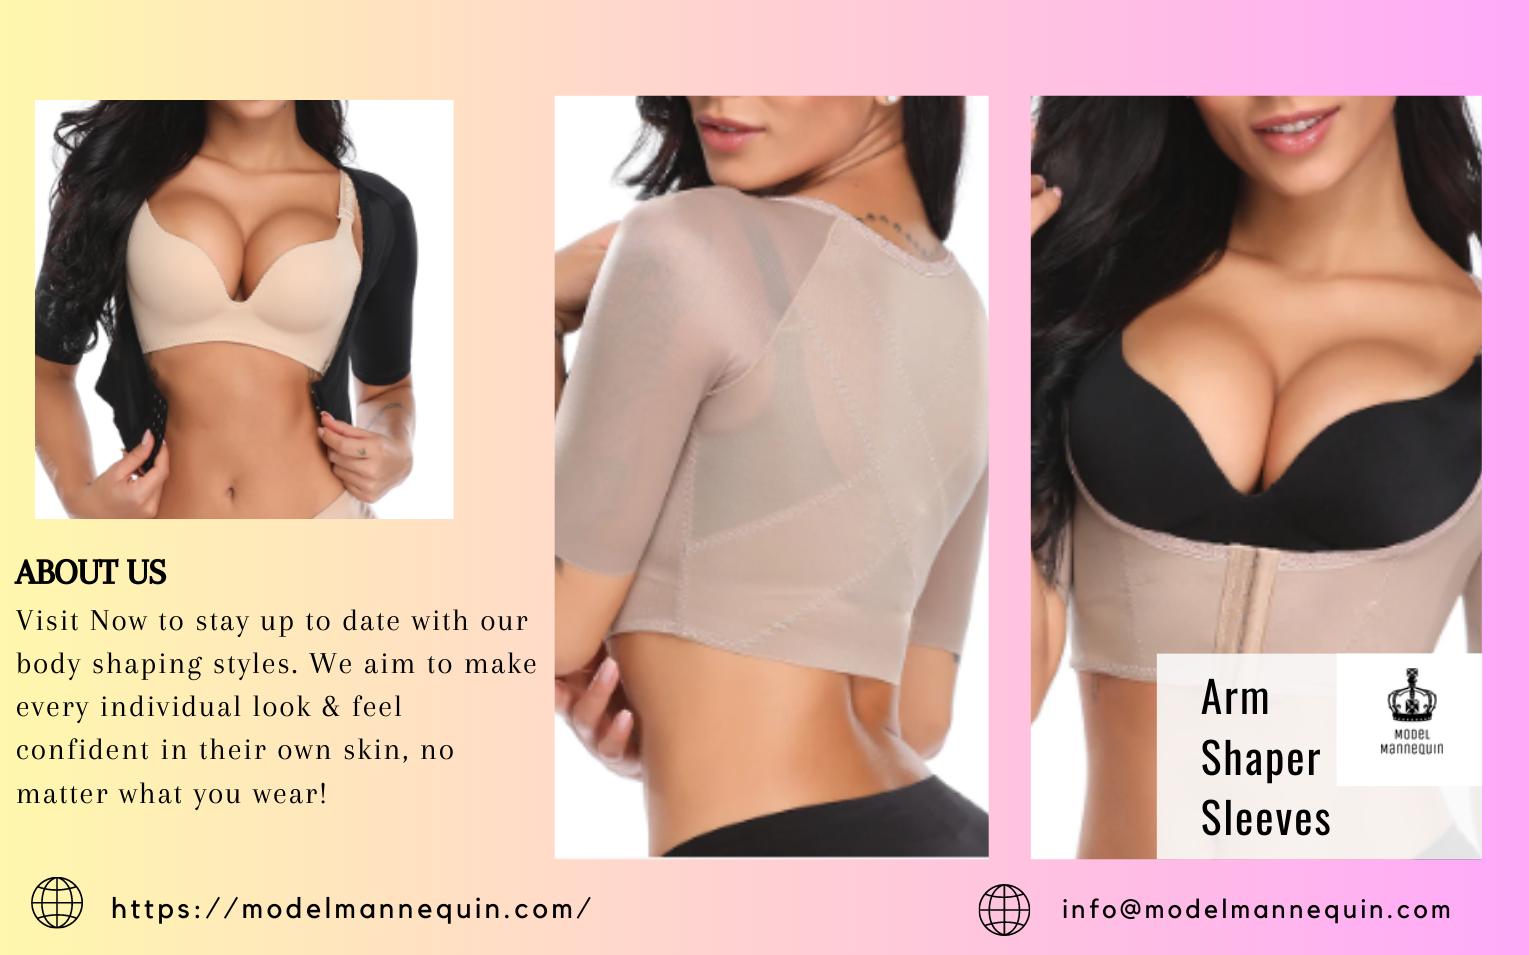 Explore Arm Shaper Sleeves at ModelMannequin